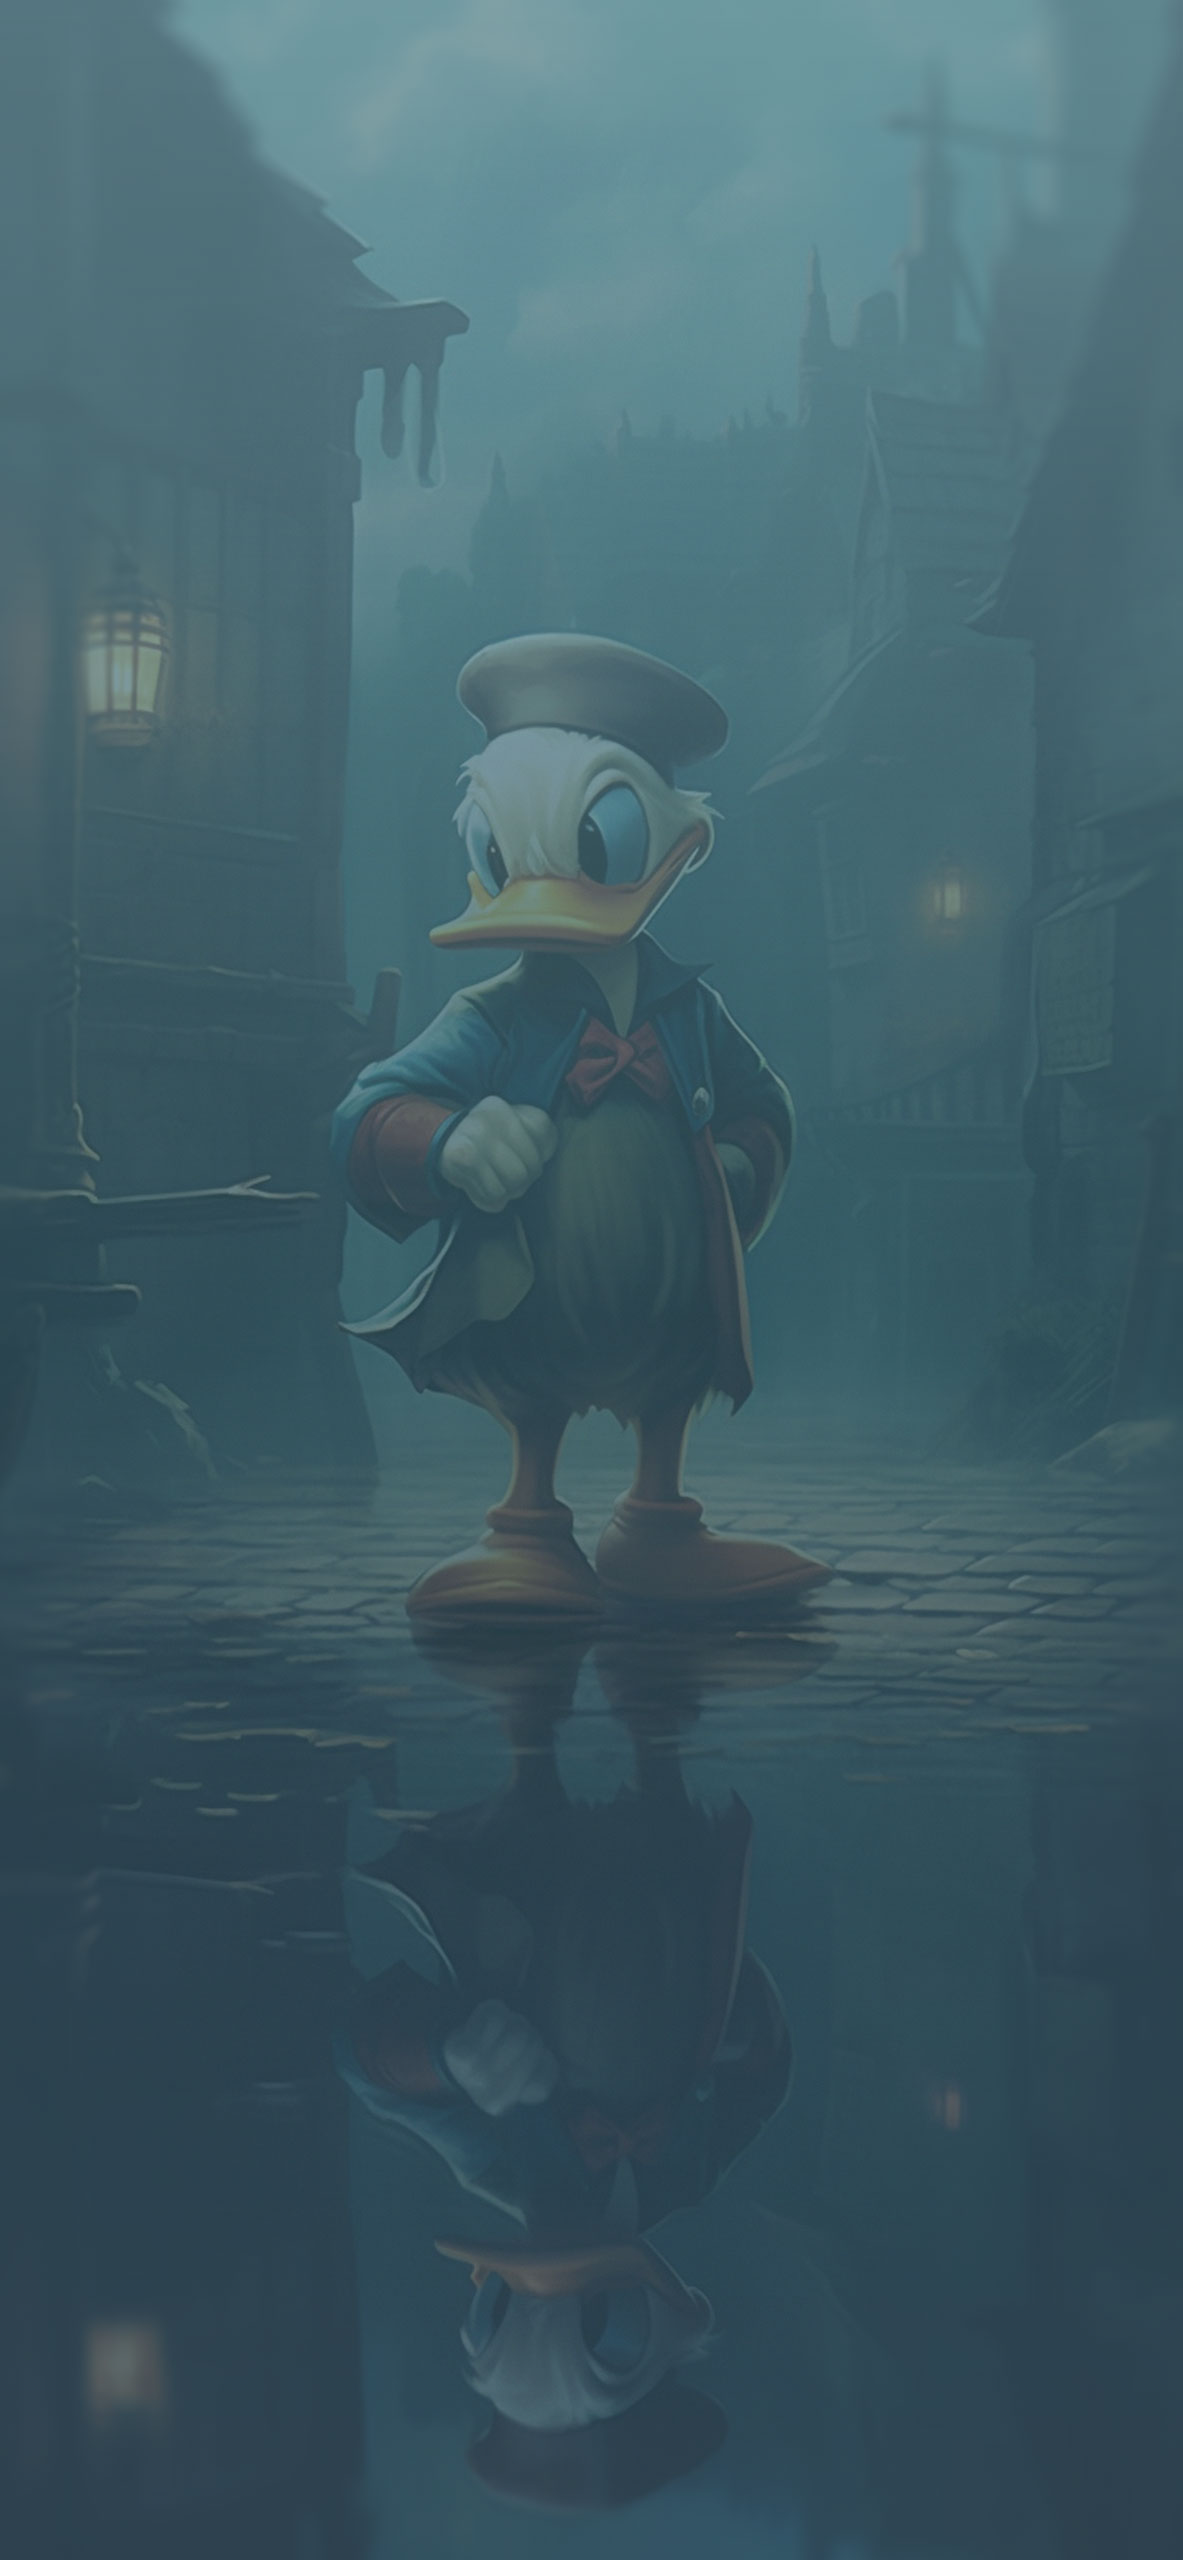 Funny Donald Duck Wallpaper for iPhone 12 Pro